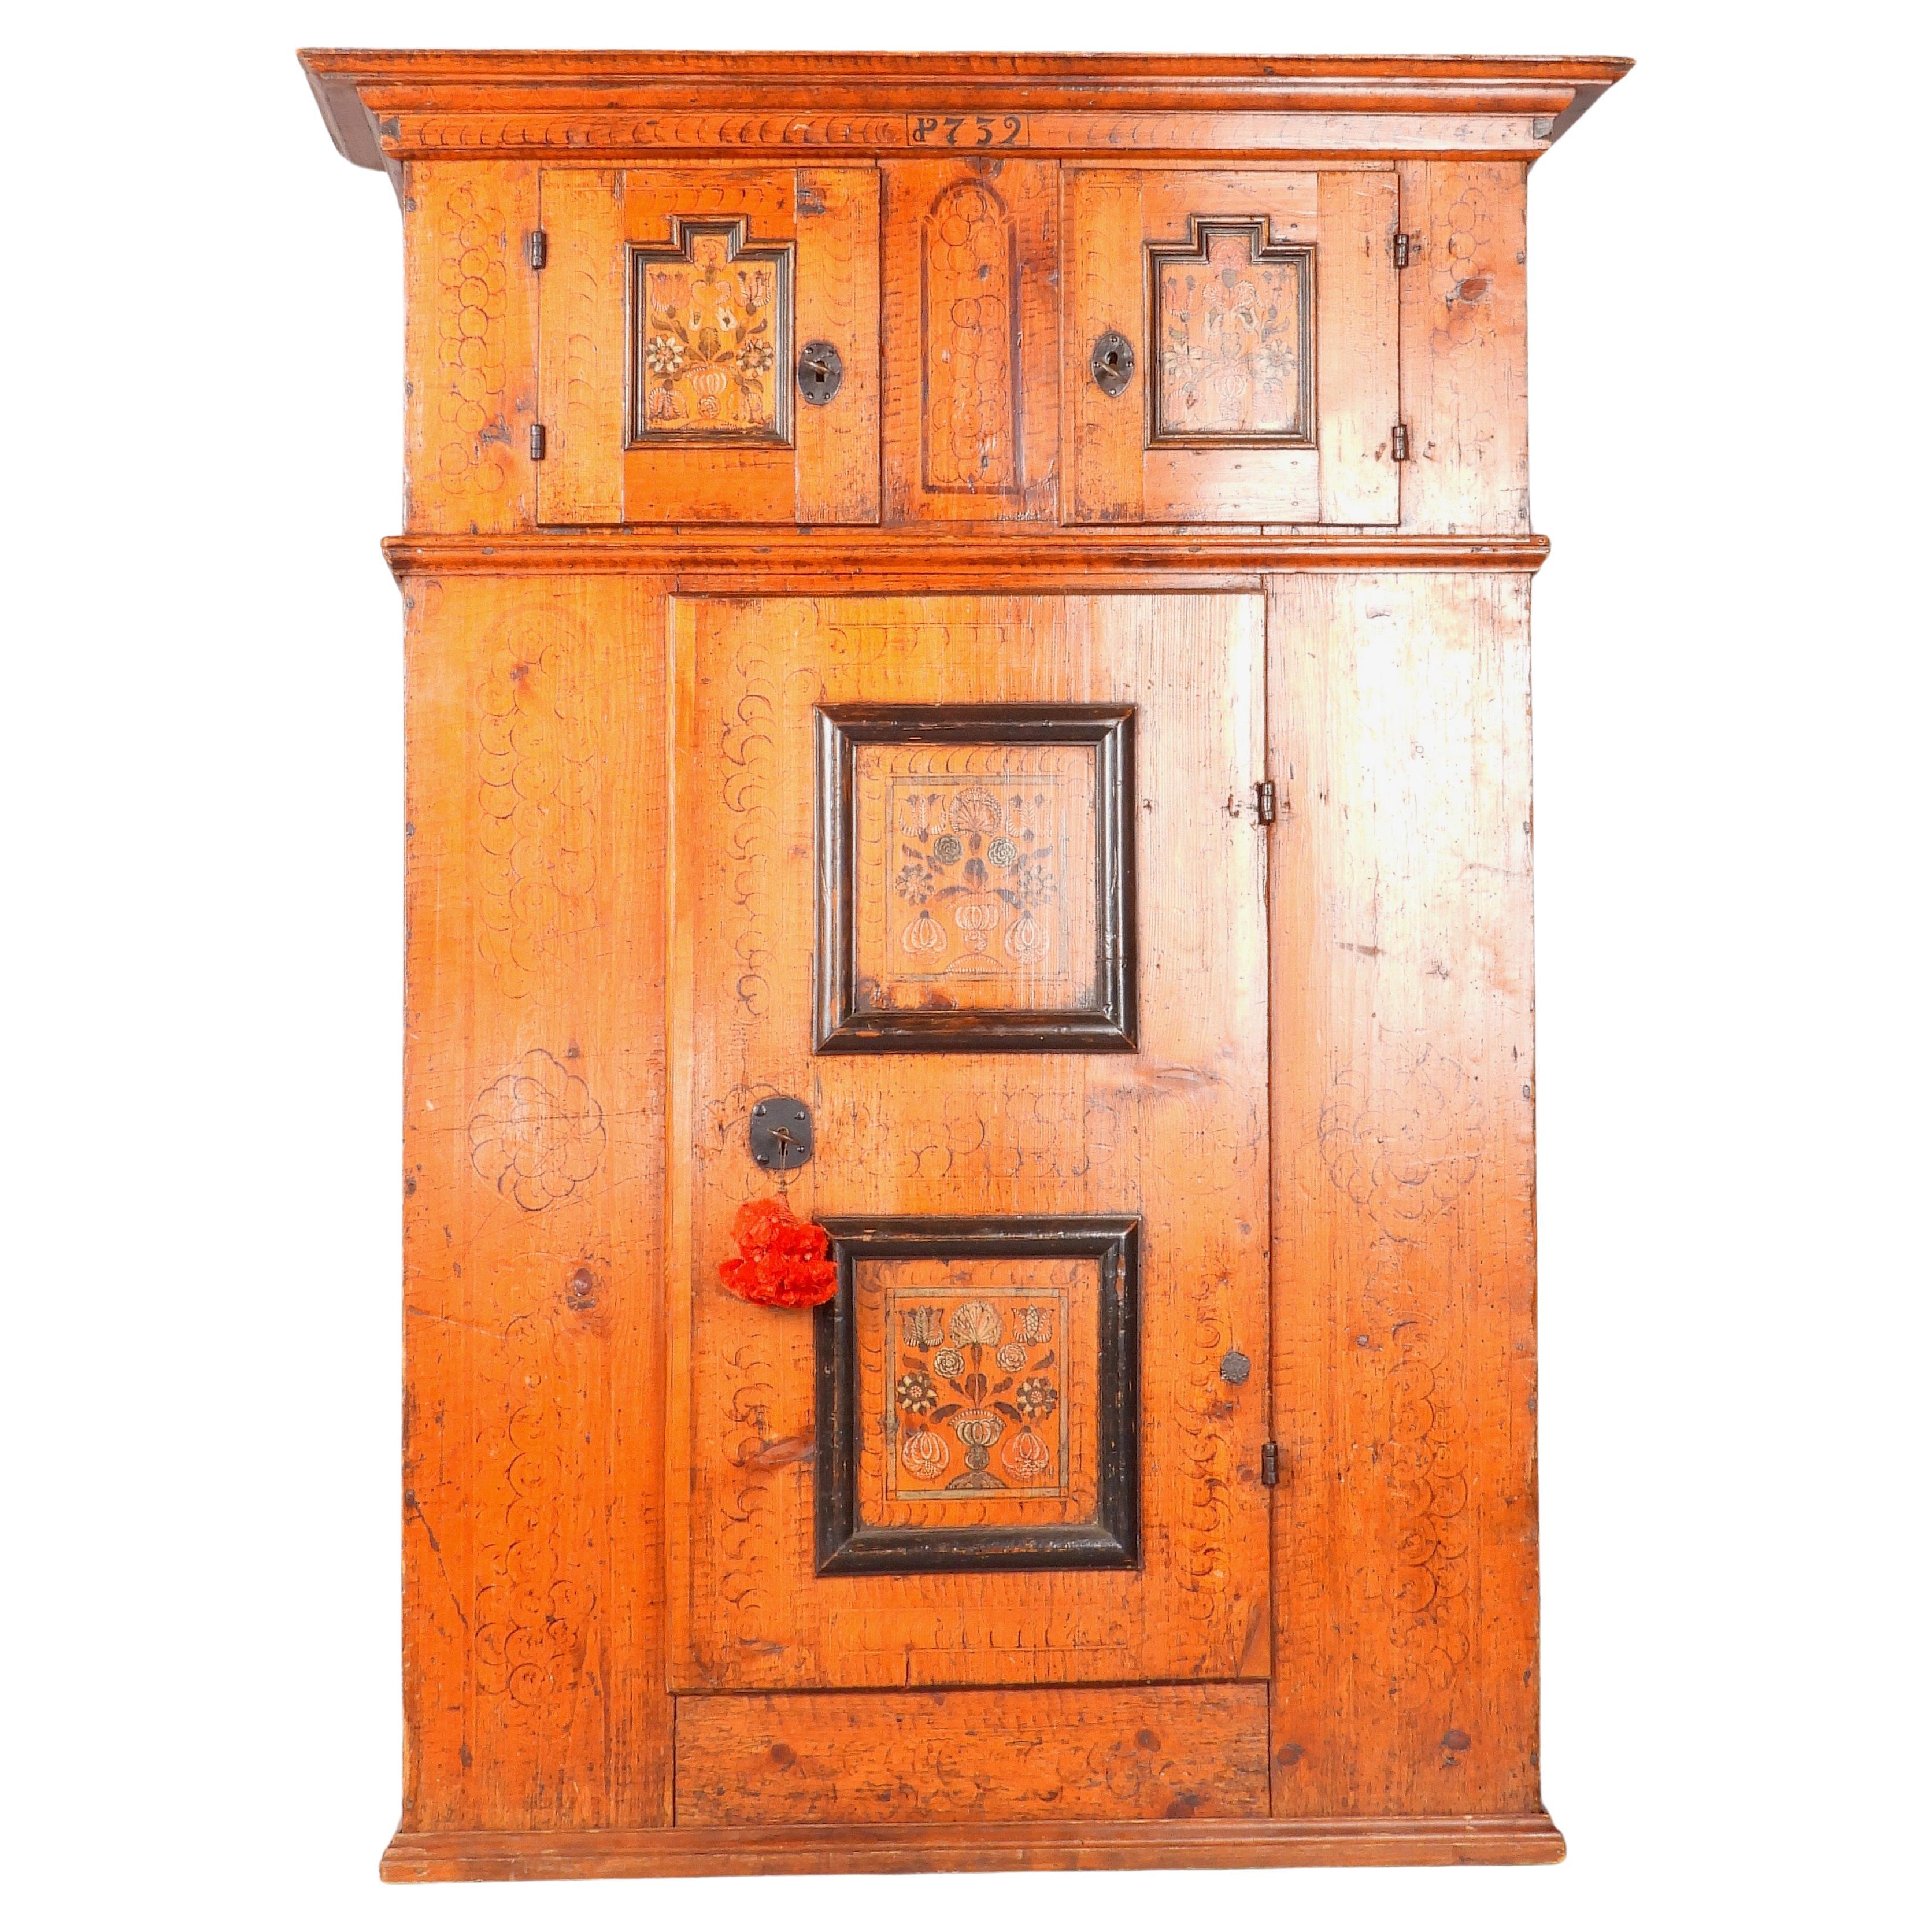 Swiss alp painted cupboard dated 1732 For Sale